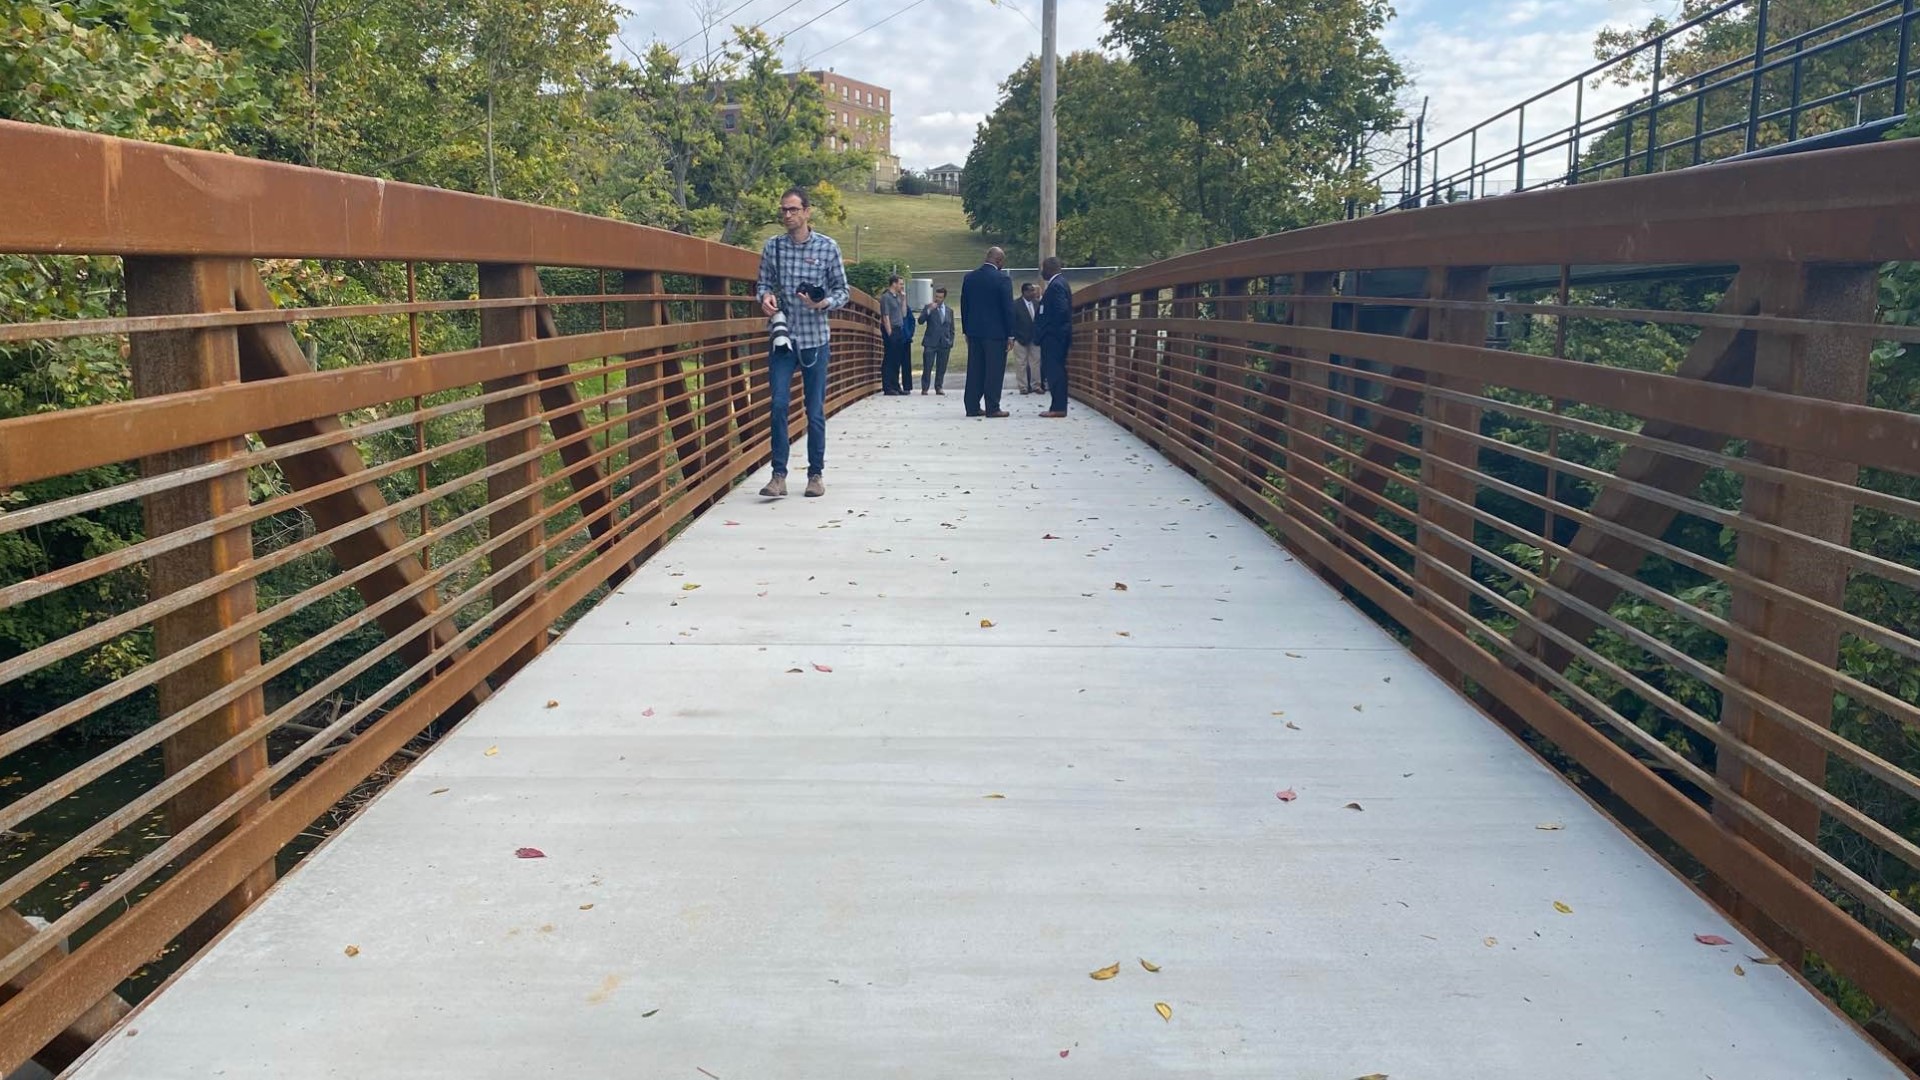 Councilman Patrick Mulvihill (D-10) said this $500,000 project has been in the works for the past seven years and that he's "thrilled" its finally complete.